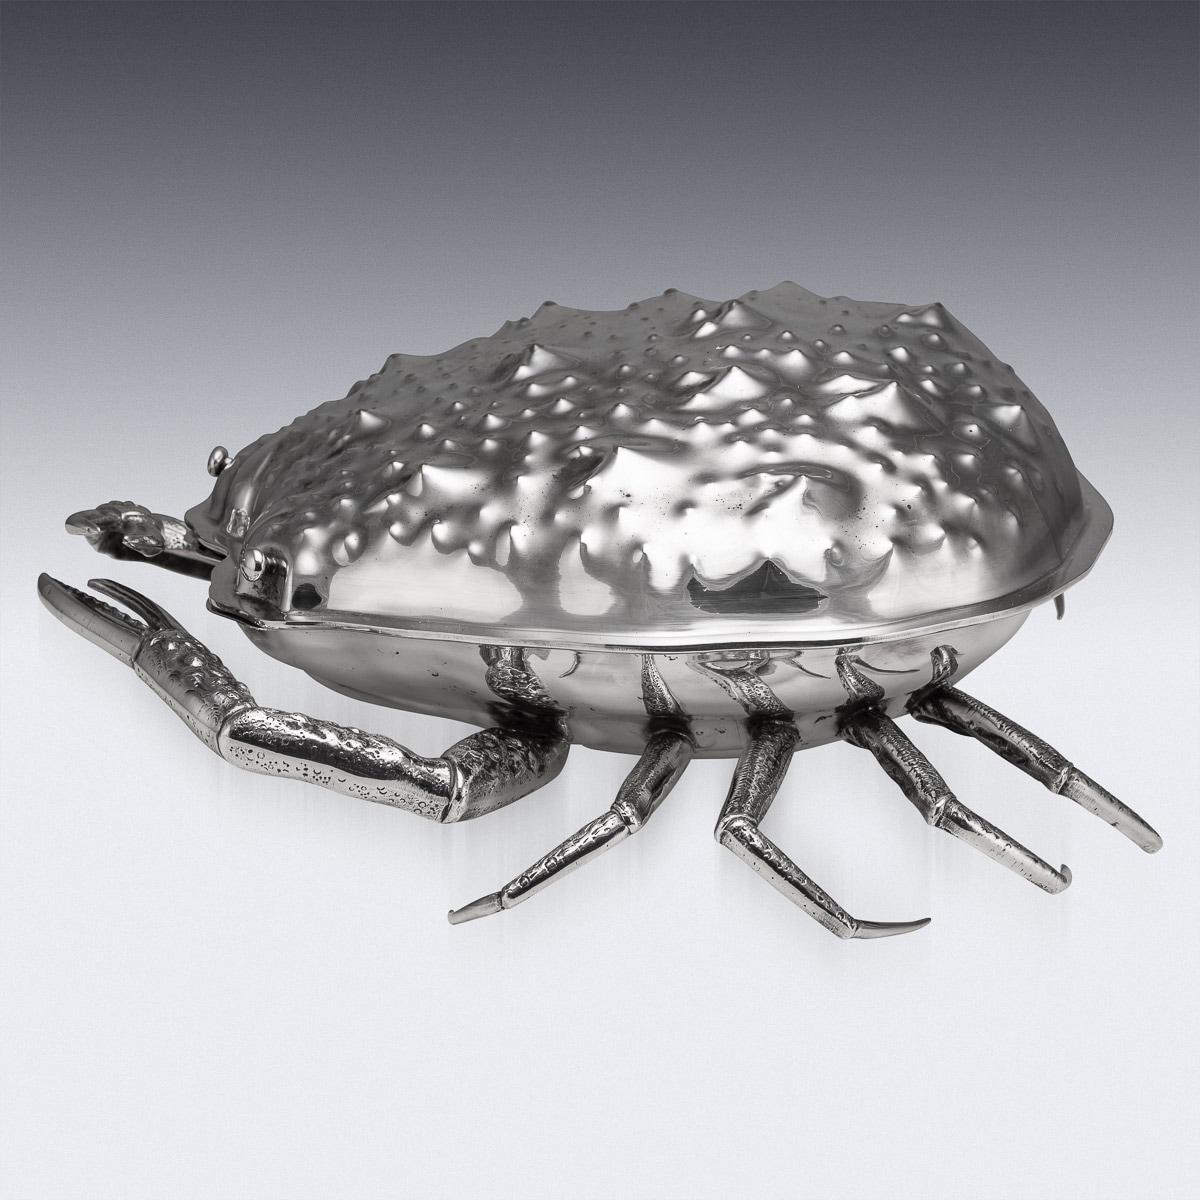 Antique mid-20th Century Italian large and unusual caviar serving dish, in the form of a crab, realistically modelled and textured, the top shell hinged onto a glass caviar dish. Possibly made by Figura Piero Per Atena (renowned, rare and very